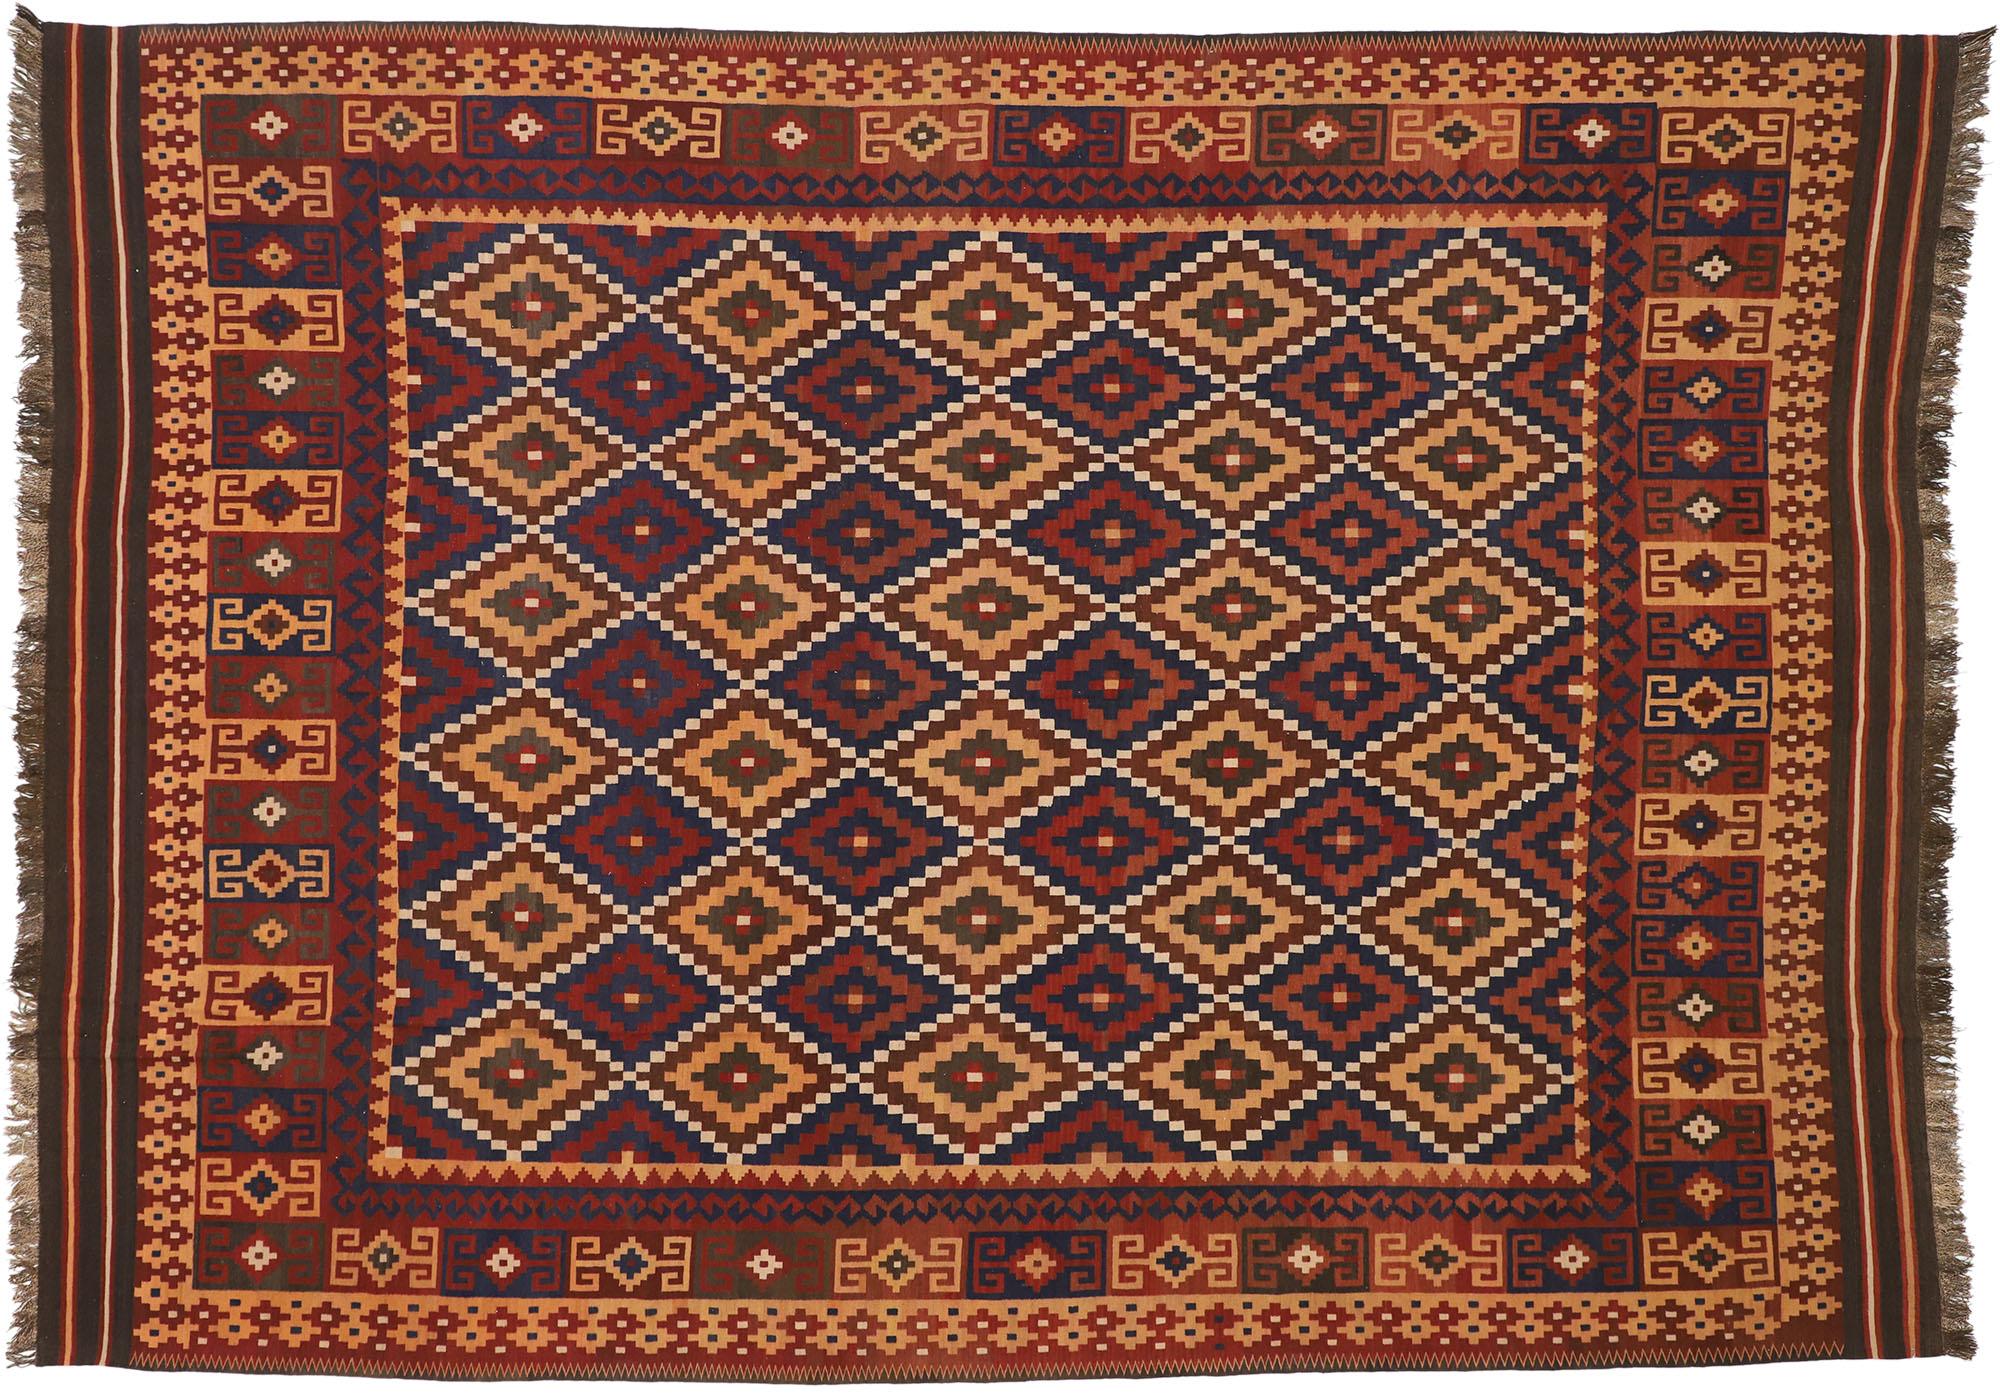 74275 vintage Afghan Kilim rug, 09'08 x 13'04. Full of tiny details and nomadic charm, this hand-woven wool vintage Afghani Maimana kilim rug is a captivating vision of woven beauty. The eye-catching diamond lattice and earthy colorway woven into